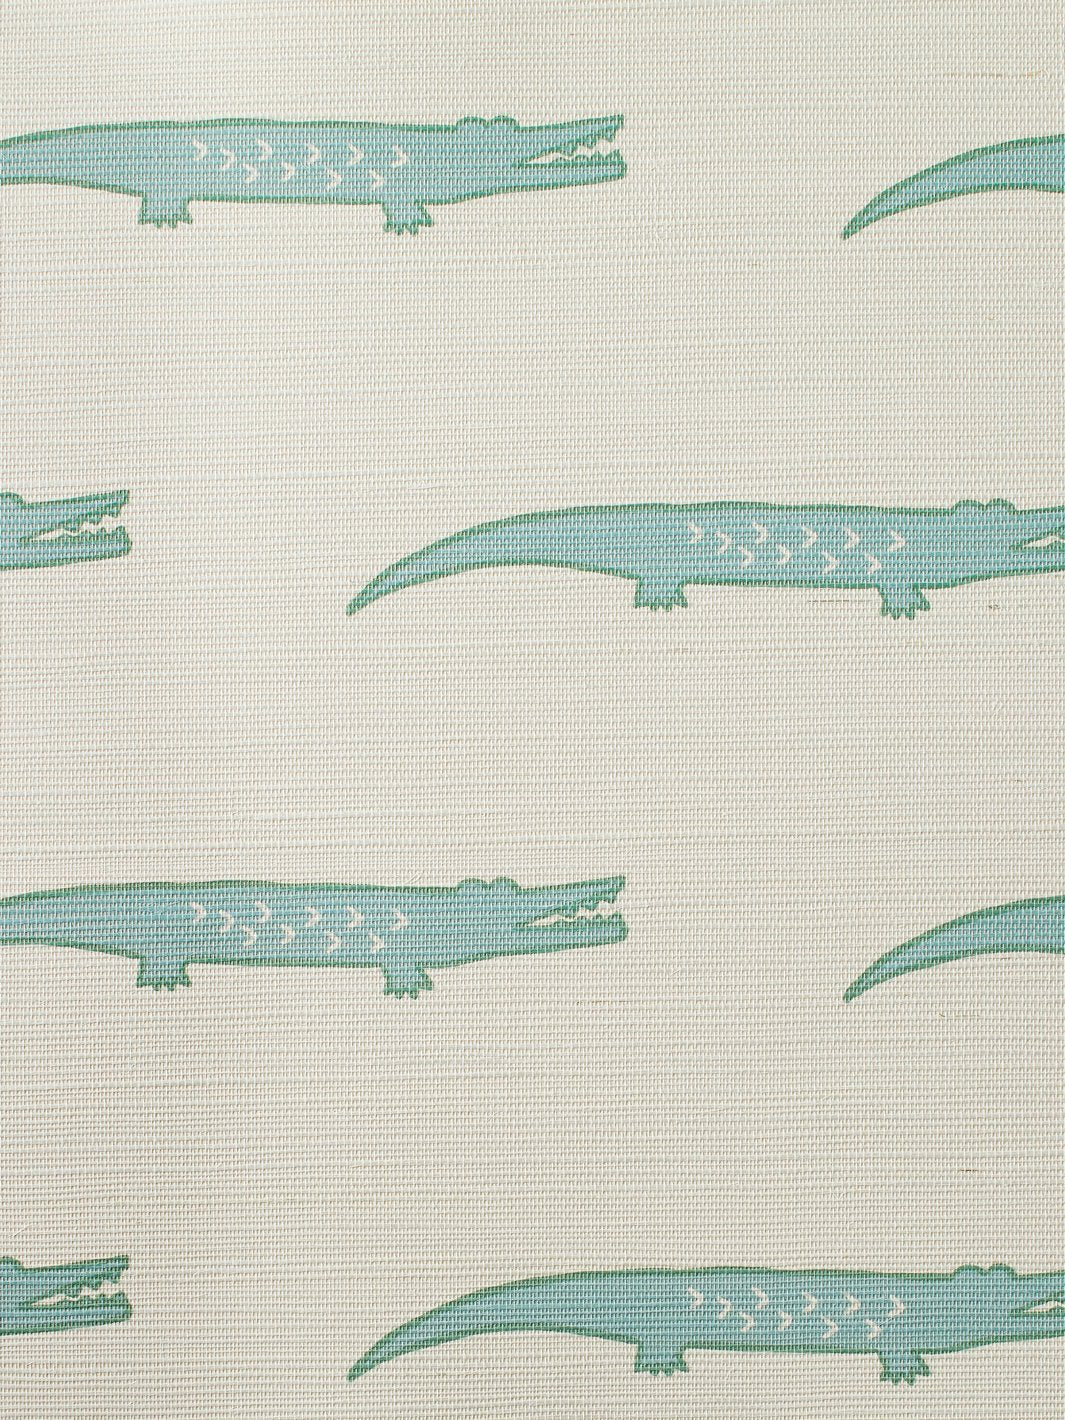 'Crocodile' Grasscloth' Wallpaper by Tea Collection